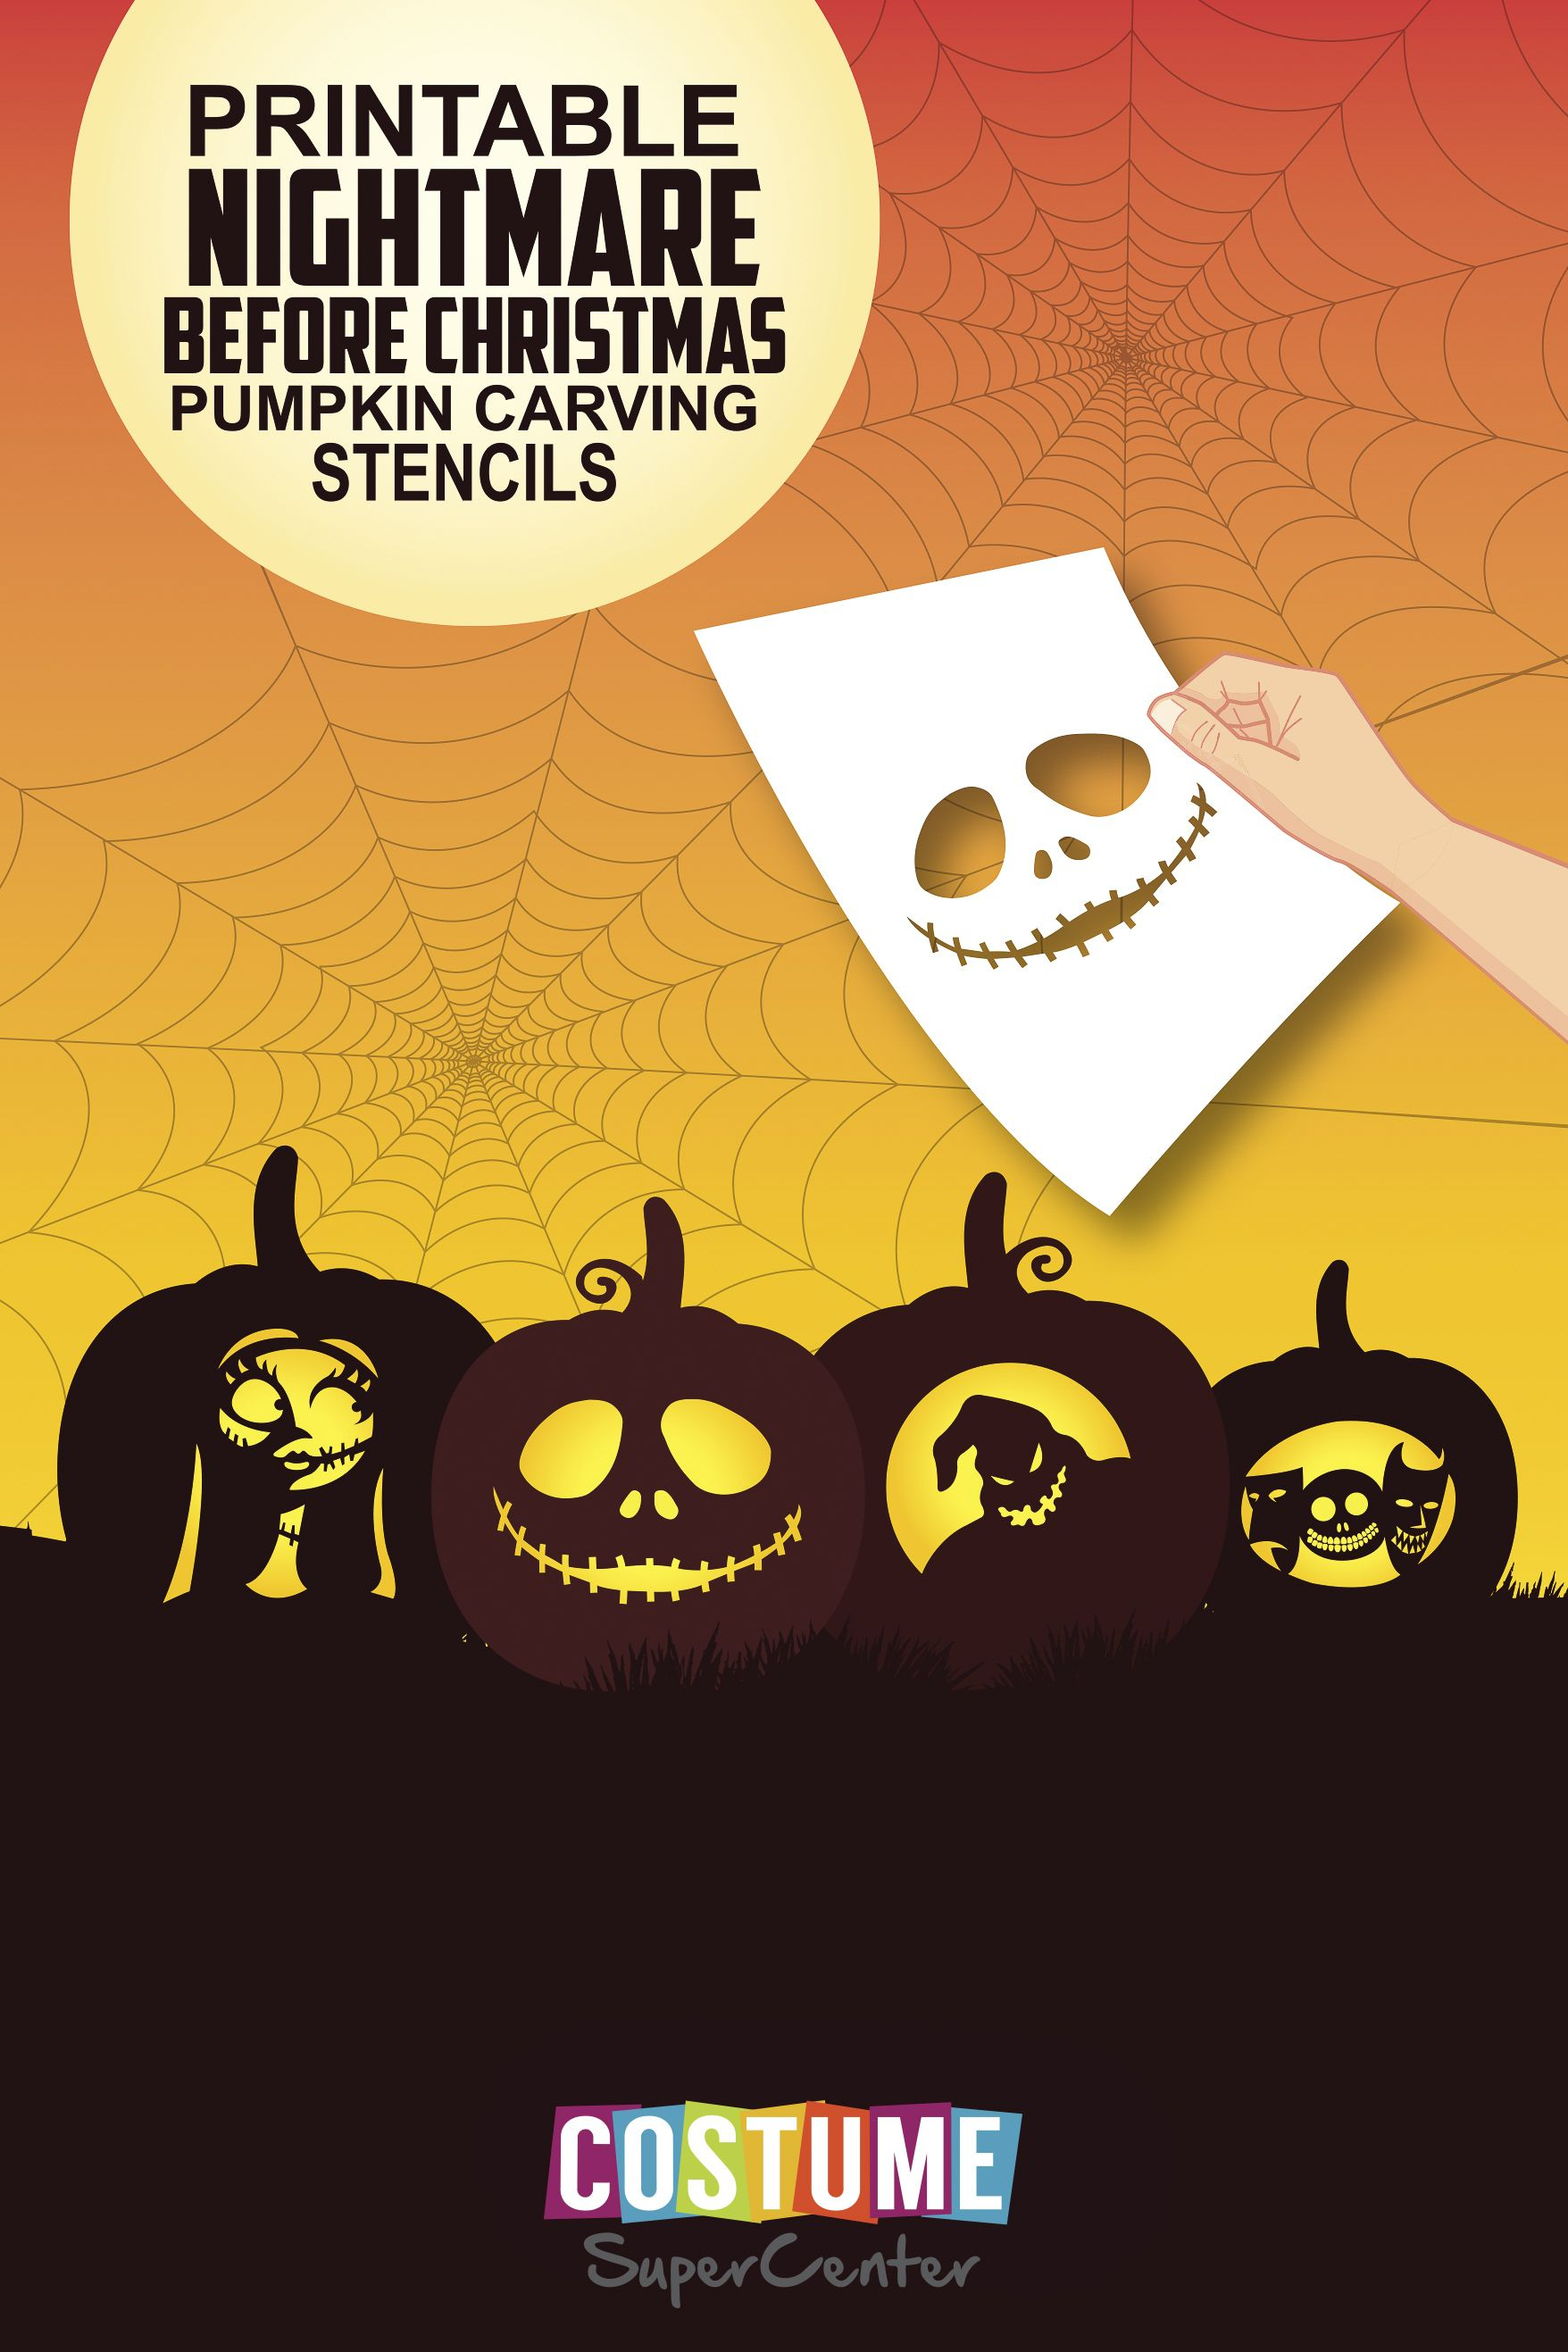 Nightmare Before Christmas Pumpkin Carving Stencils | Home Projects - Free Printable Nightmare Before Christmas Pumpkin Stencils